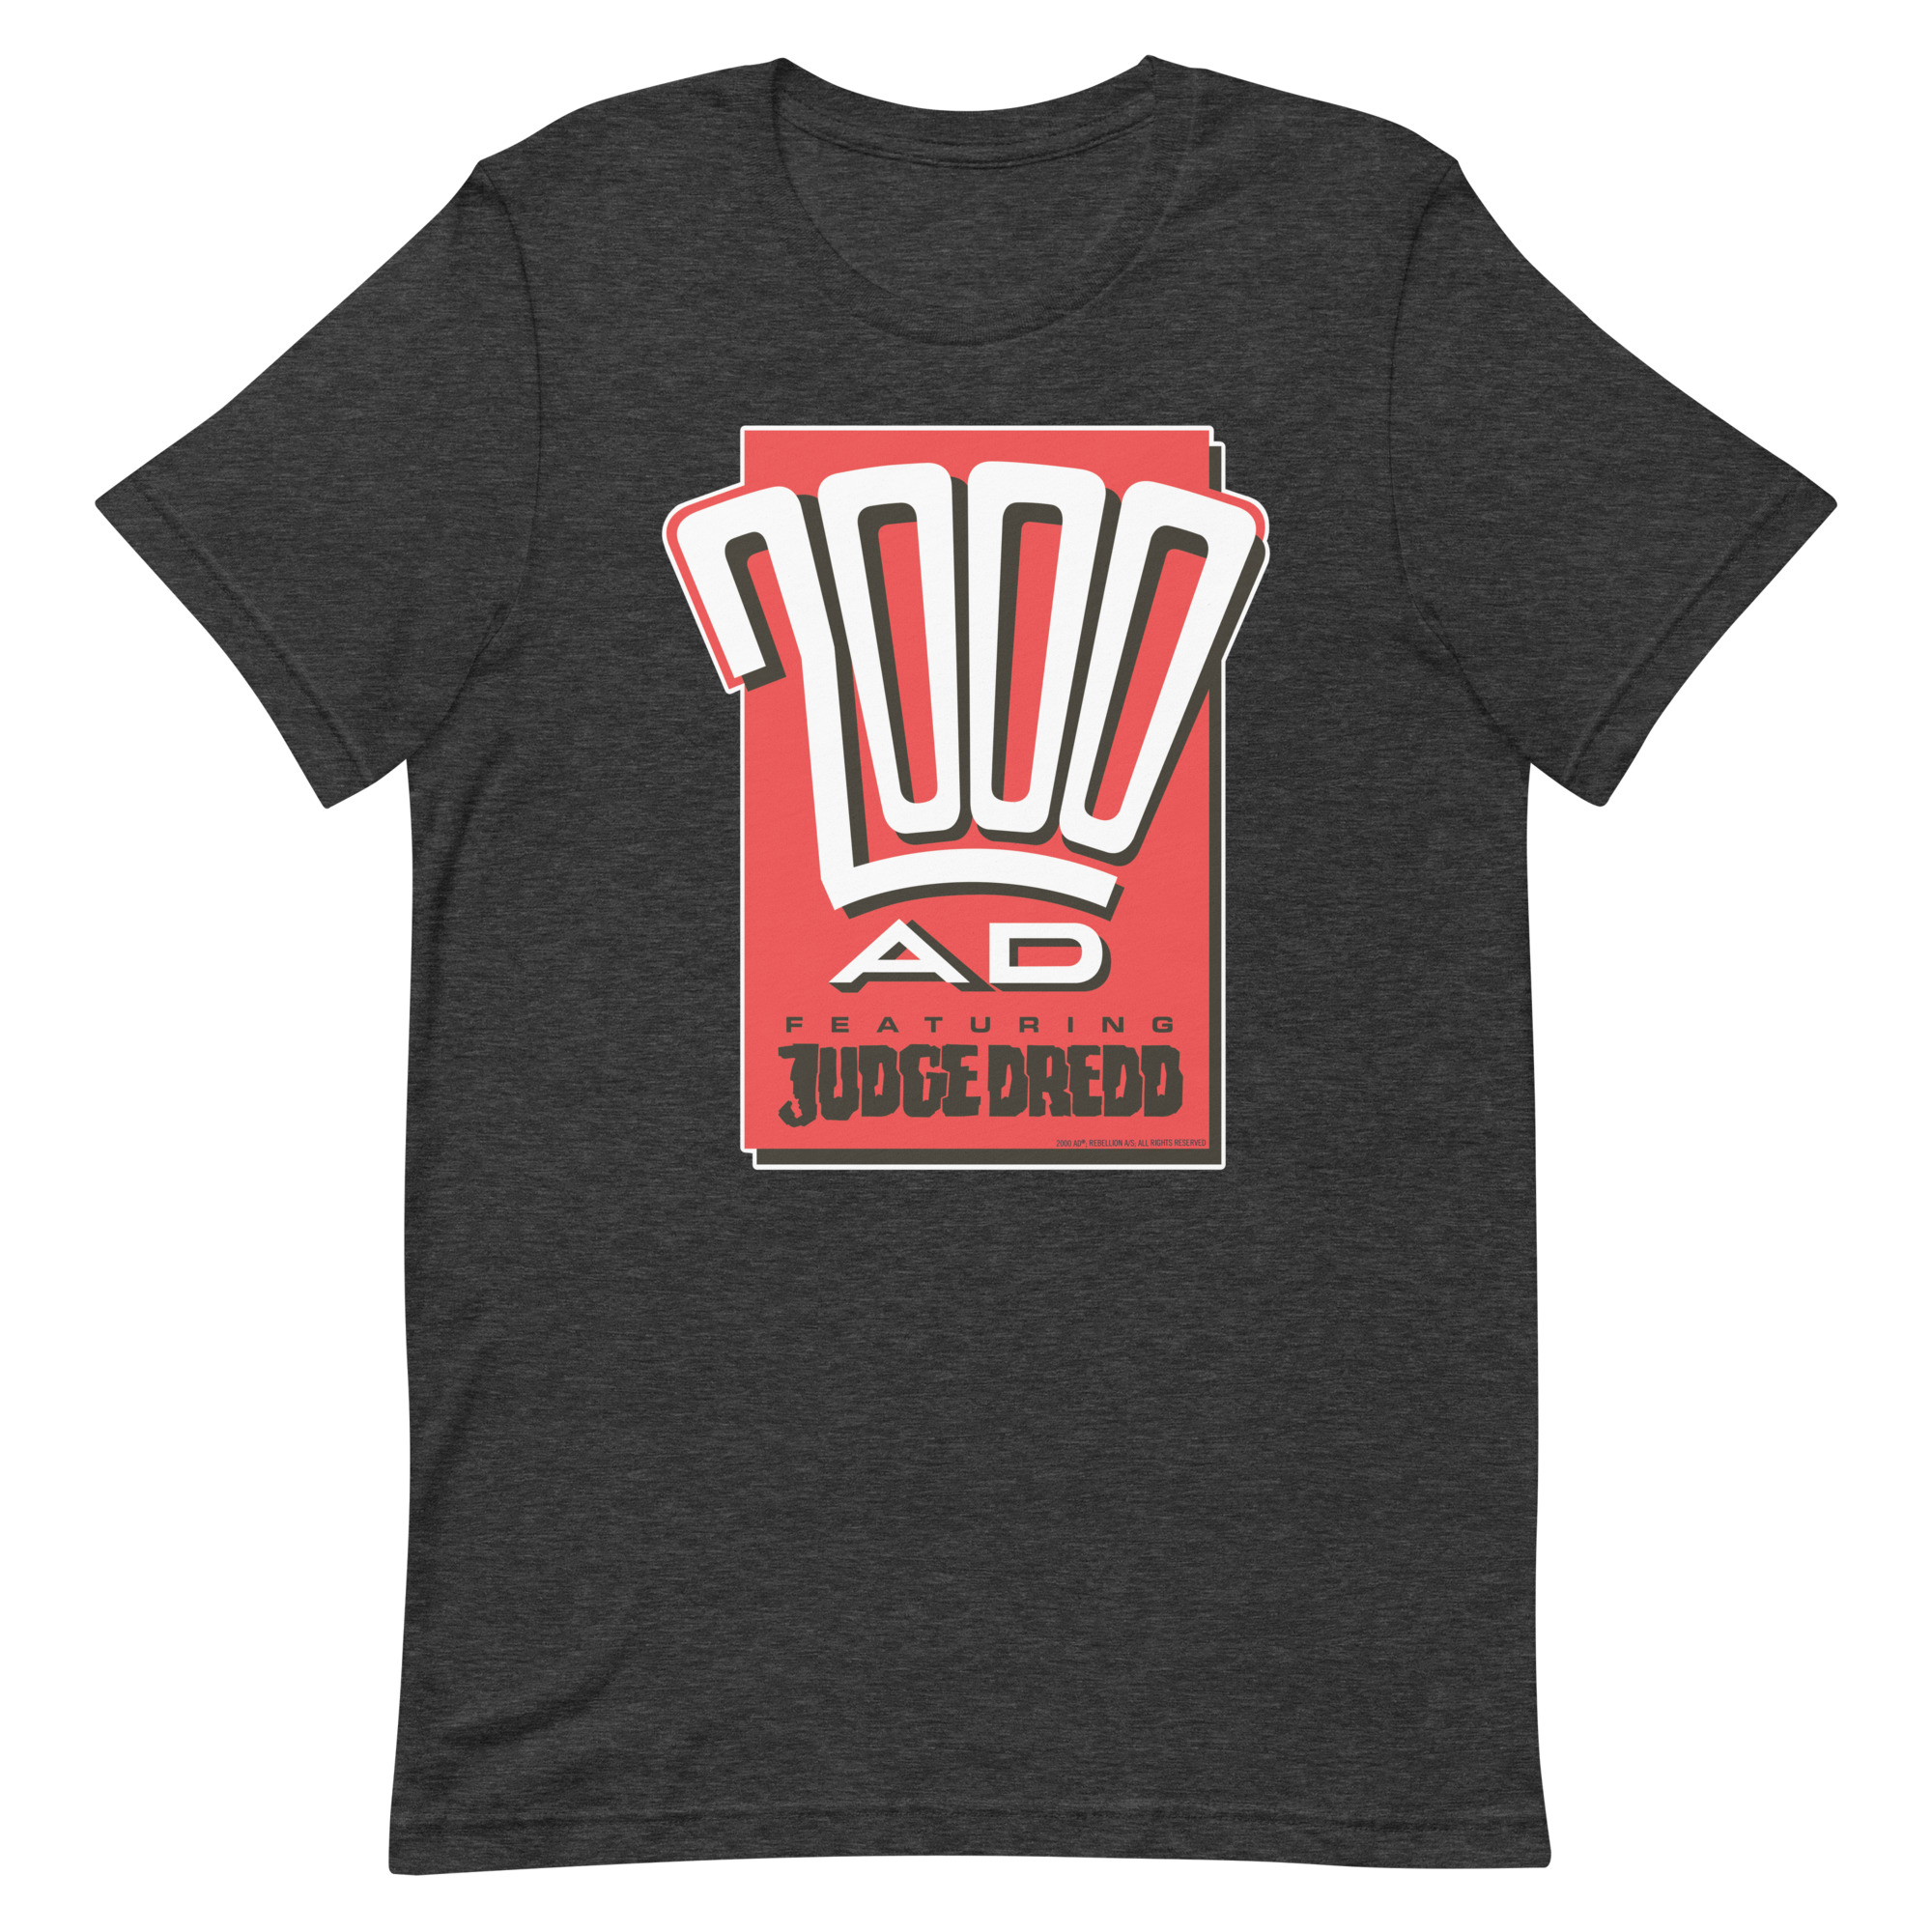 Image of a Dark Grey Heather coloured 2000AD - Classic 1990s Fan t-shirt featuring a large 2000AD - Classic 1990s Fan logo in the middle